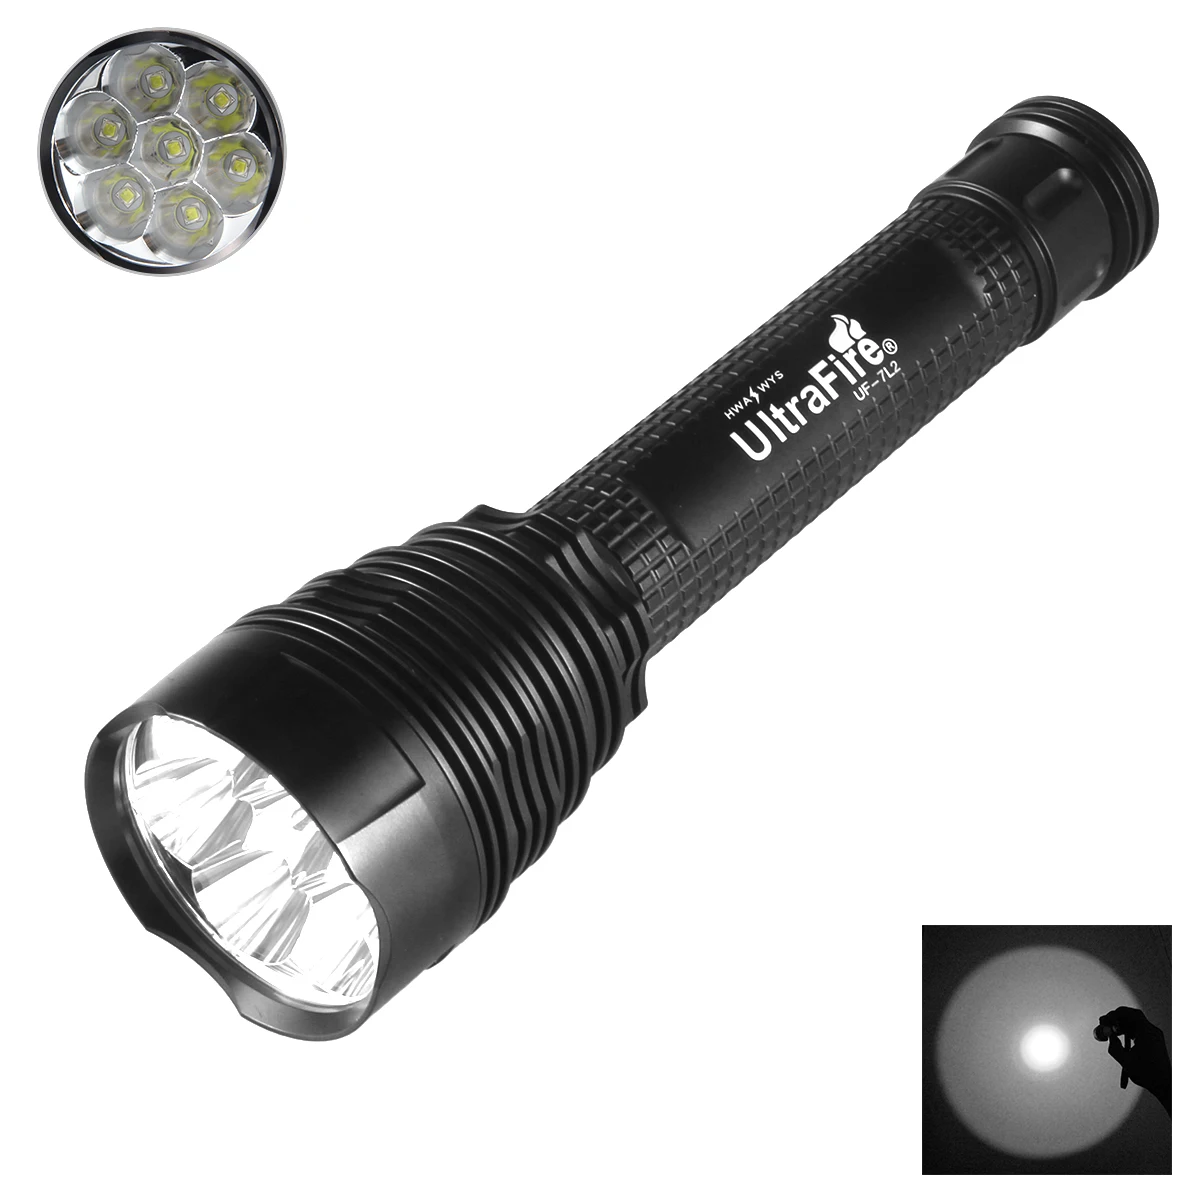 New Ultrafire XM-L 7L2 LED Flashlight 8000LM 5-Mode Memory Function Waterproof High Power Torch